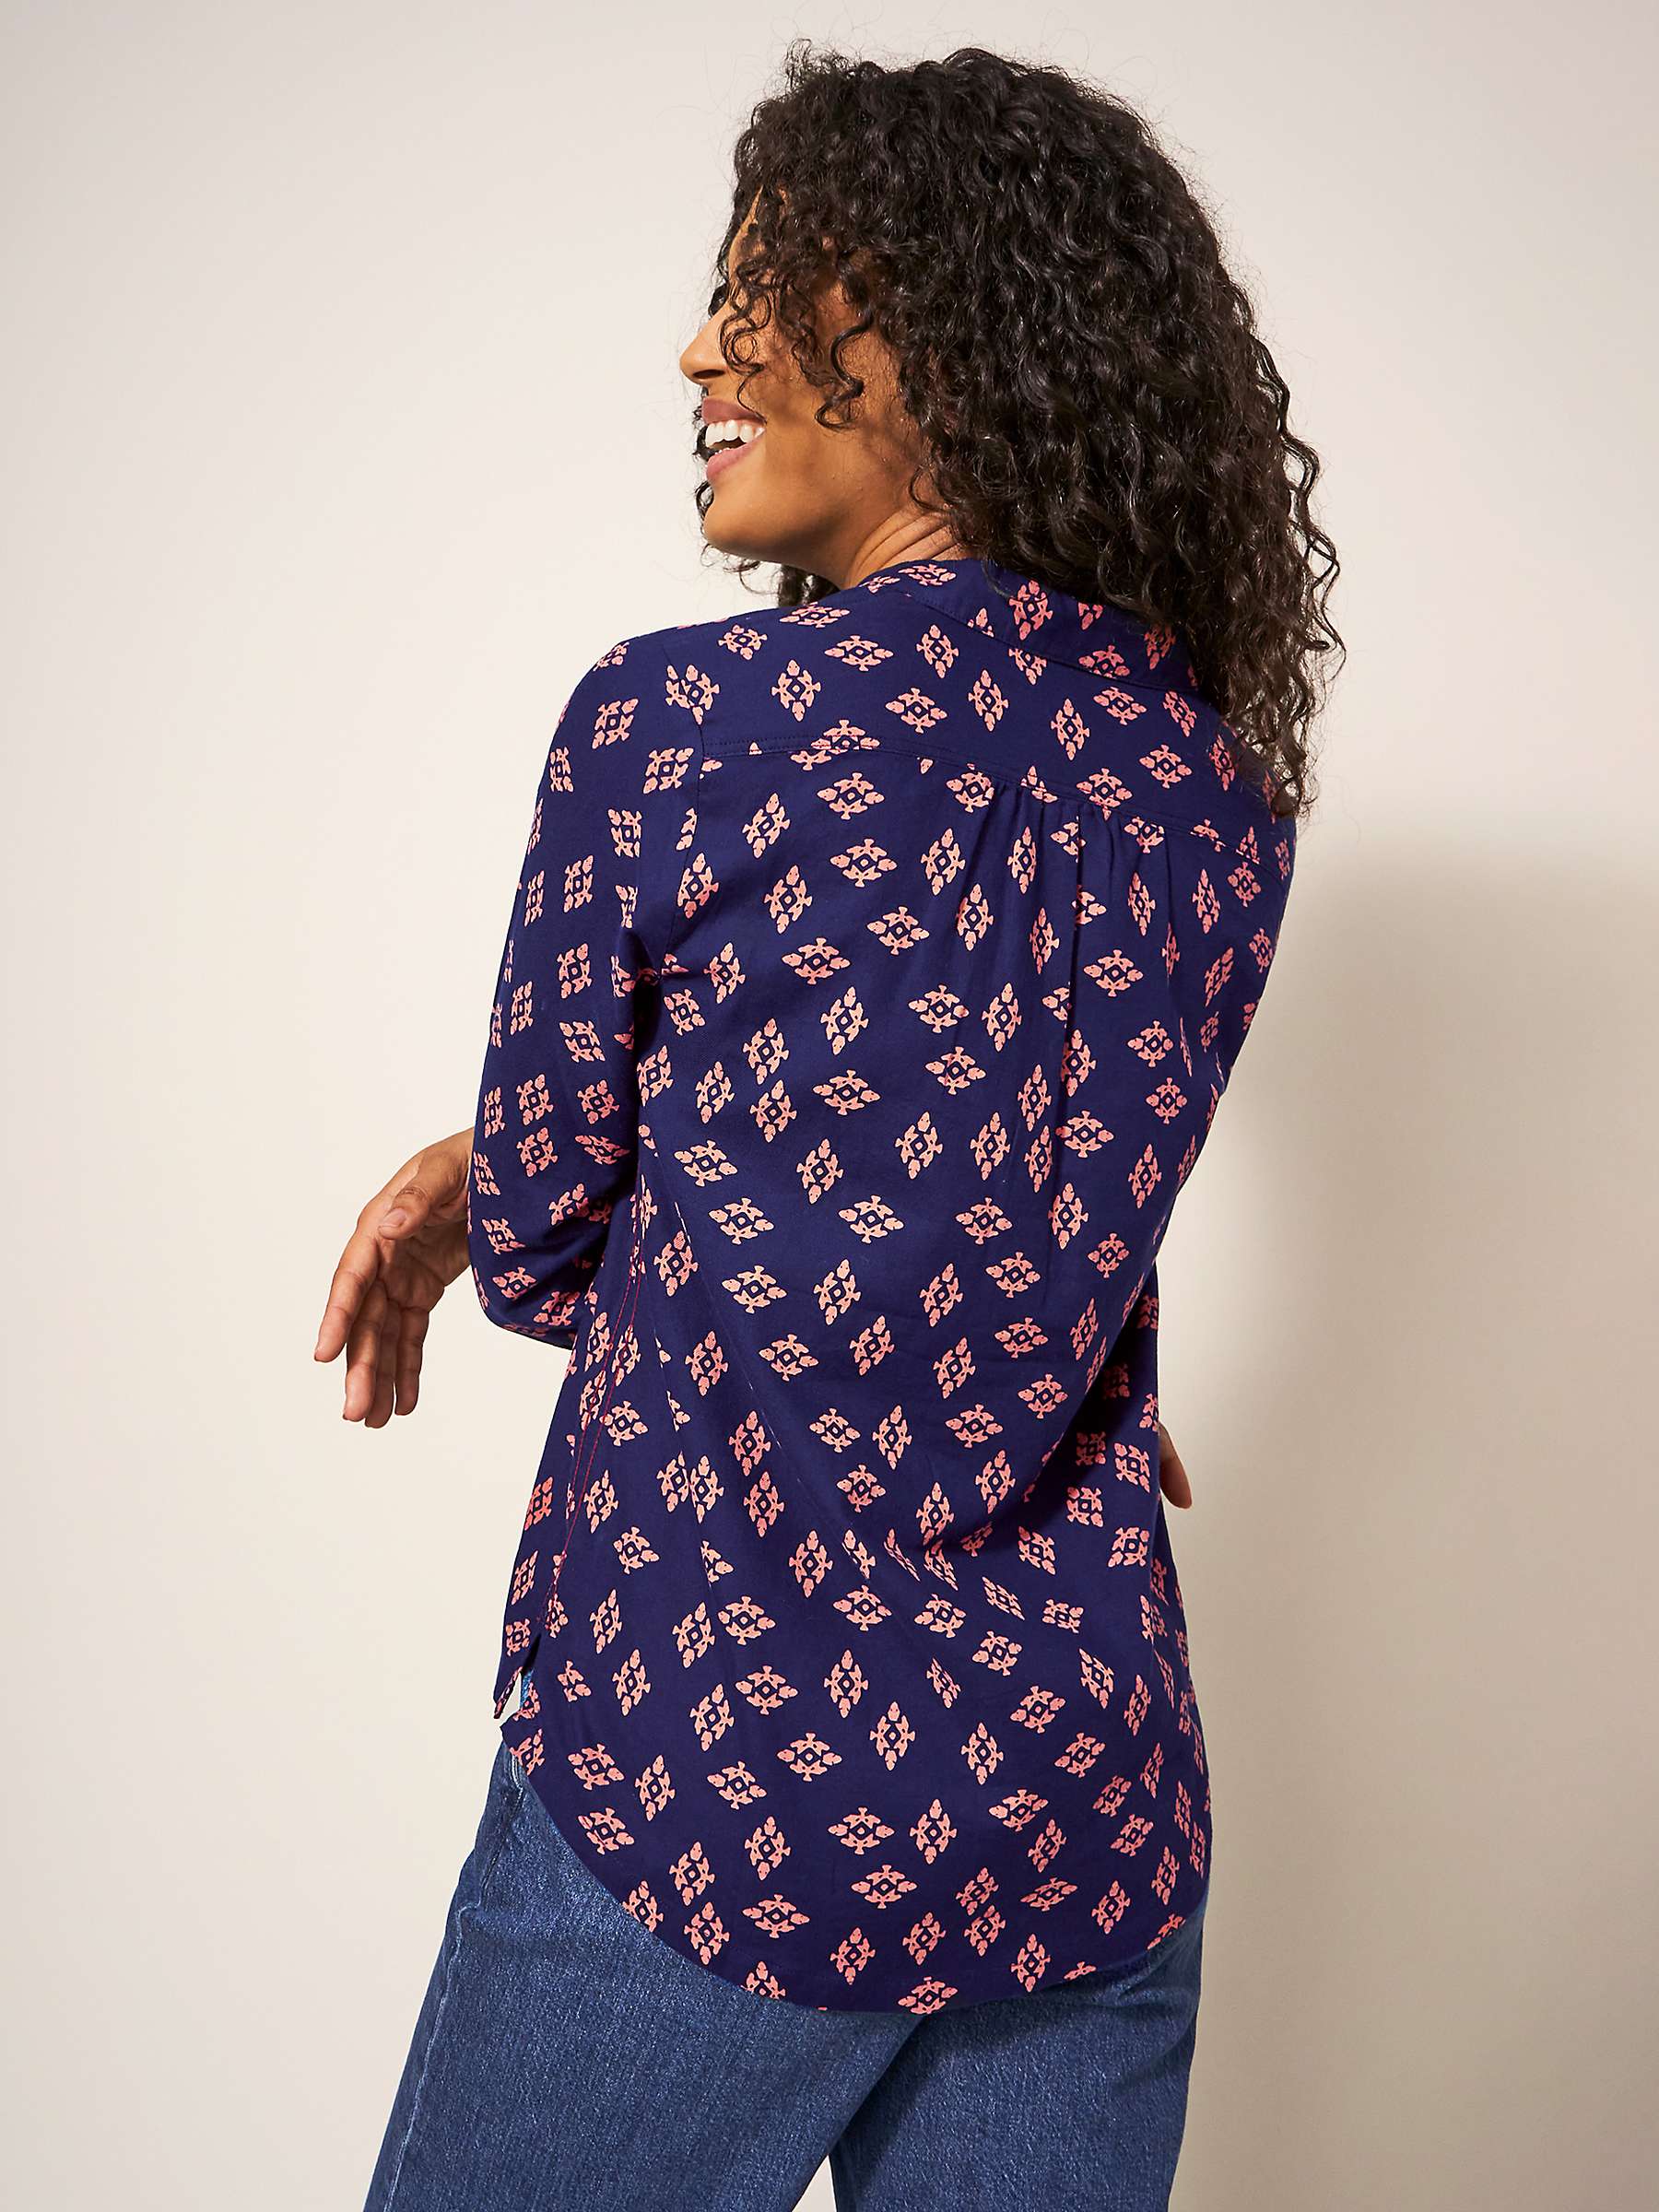 Buy White Stuff Abstract Floral Organic Cotton Shirt, Navy Online at johnlewis.com